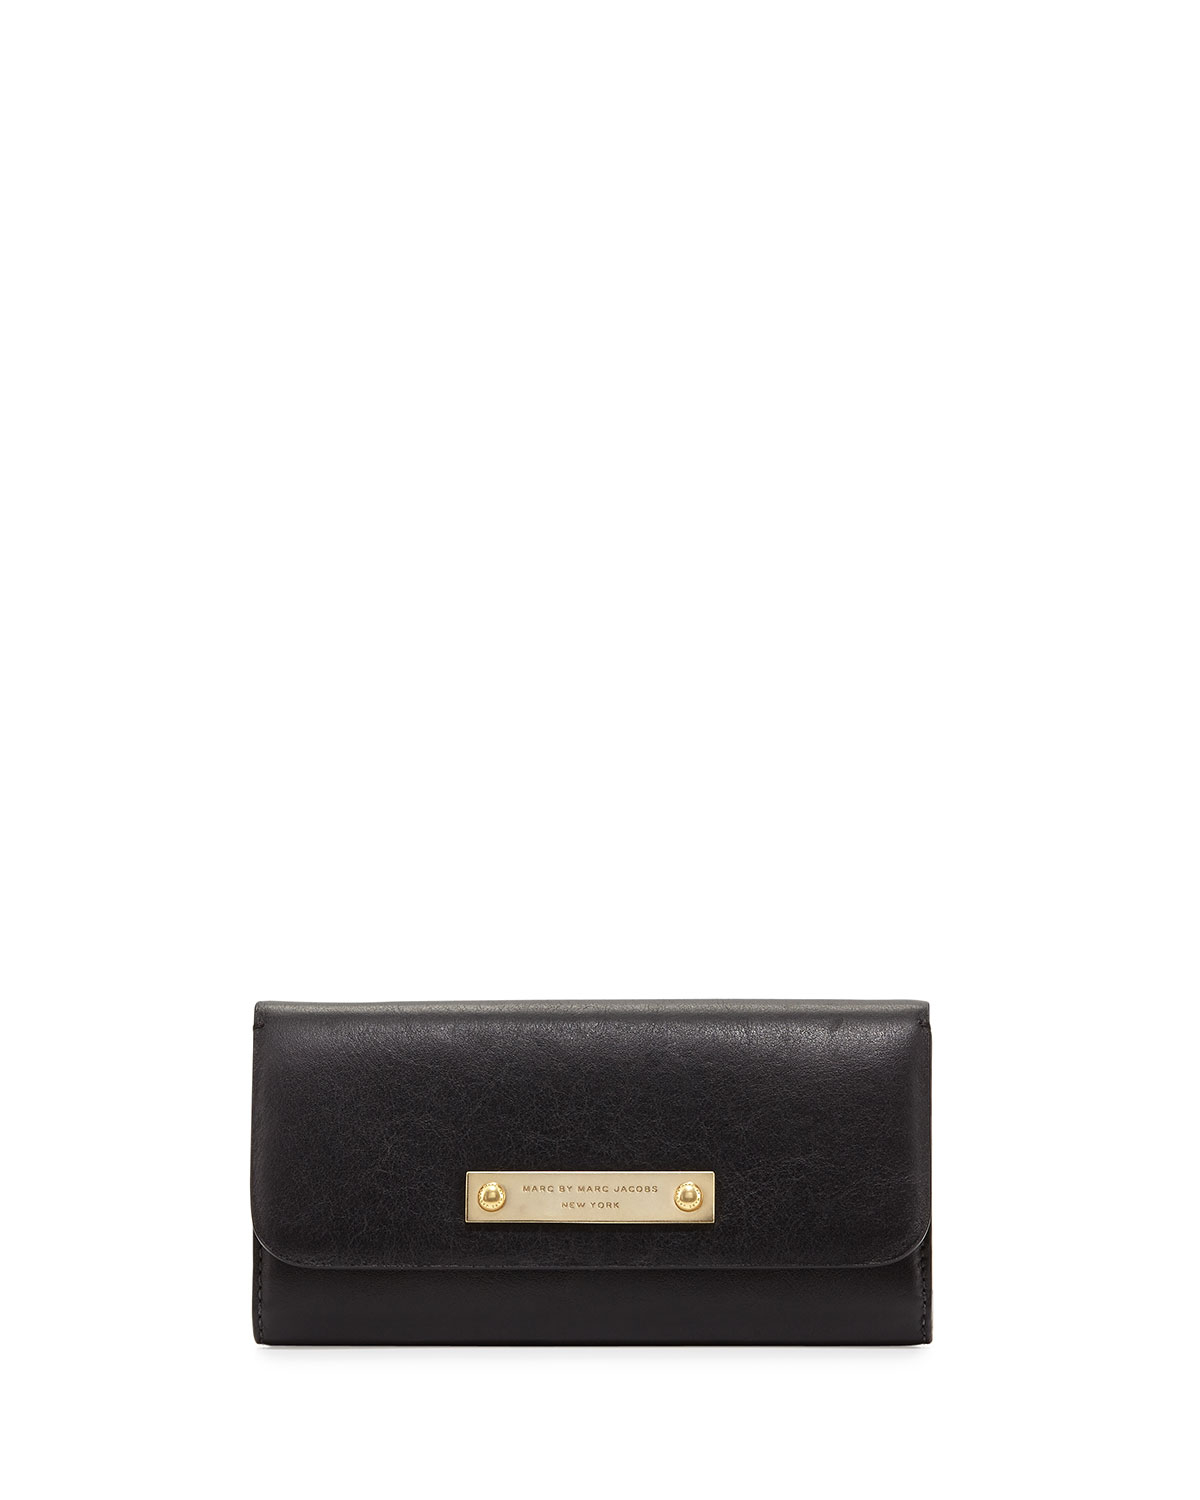 Lyst - Marc by marc jacobs Goodbye Columbus Continental Wallet Black in ...